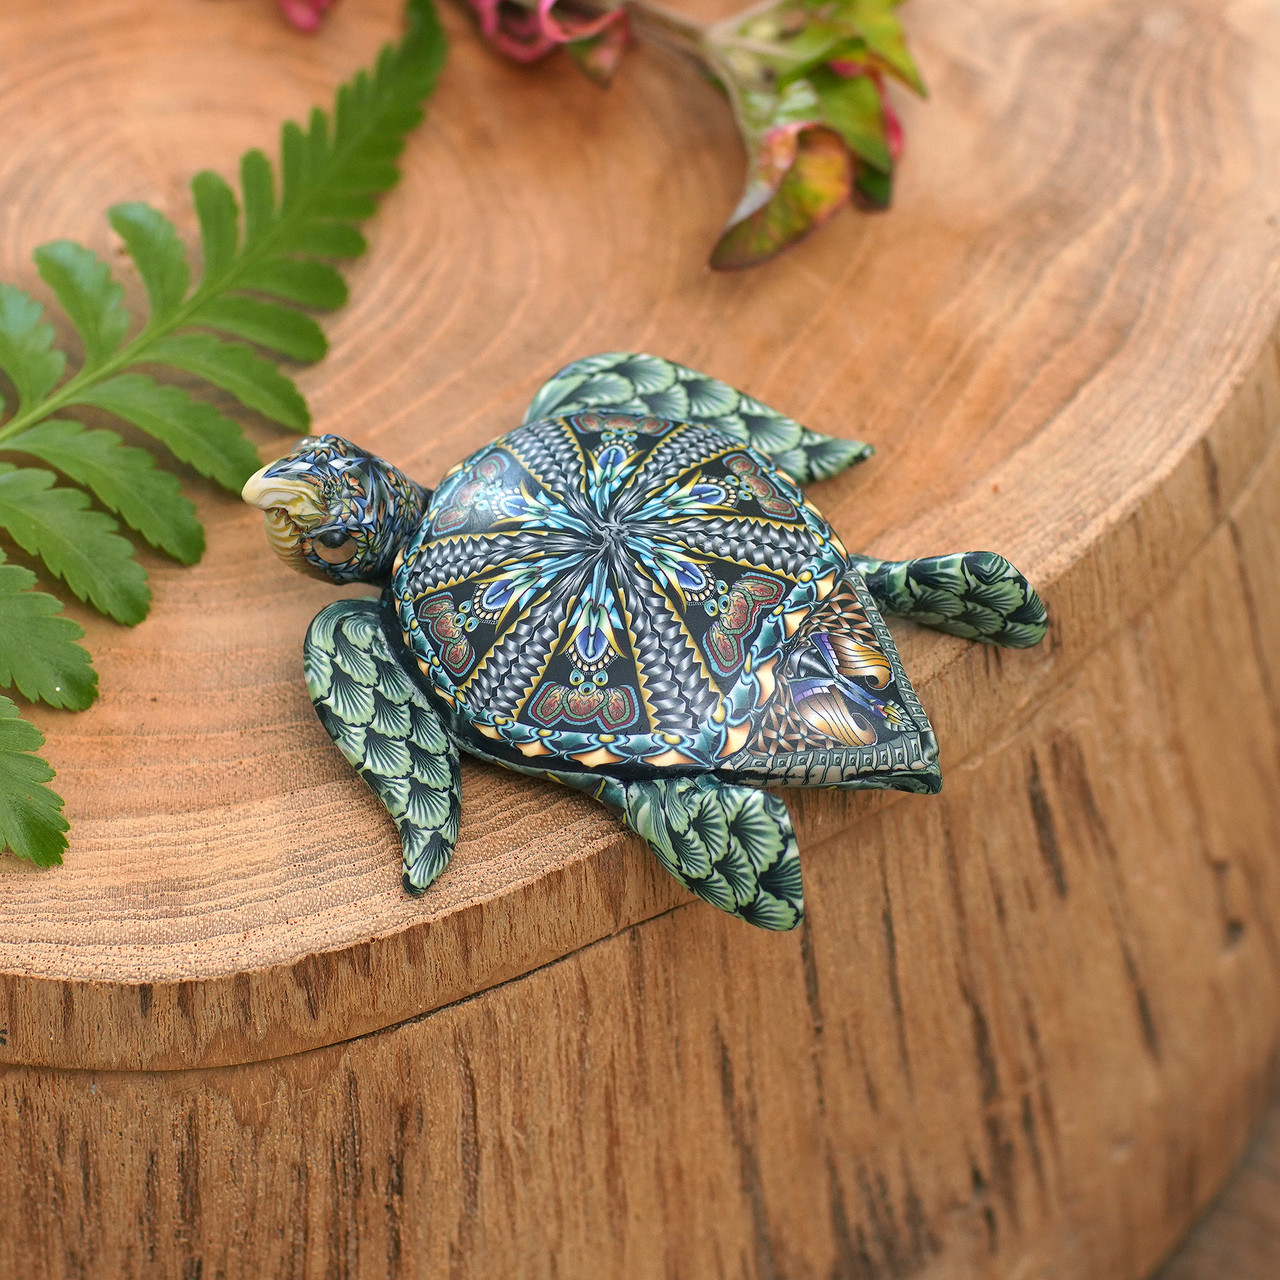 DIY Polymer Clay Kit - Turtle – The Clay Republic